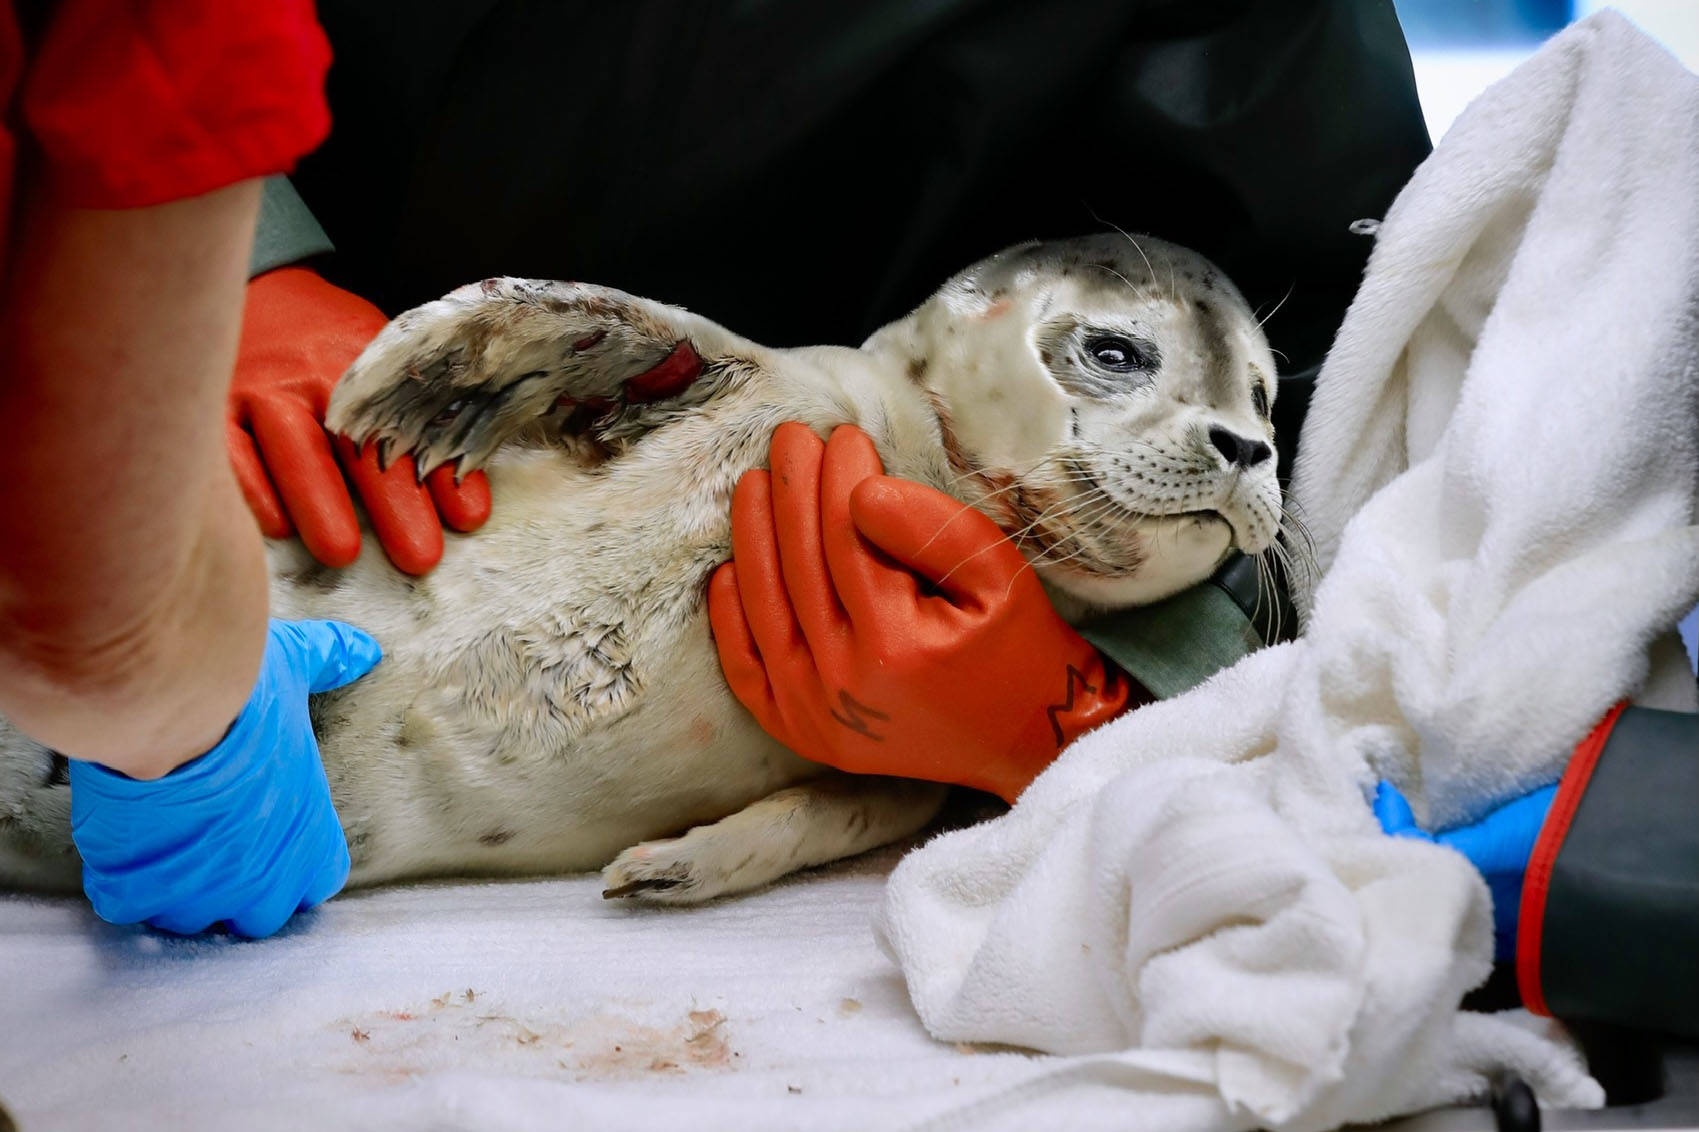 Alaska SeaLife Center
Rescuers assist an injured harbor seal pup on July 4. The pup was spotted in Resurrection Bay and taken to the Alaska SeaLife Center.